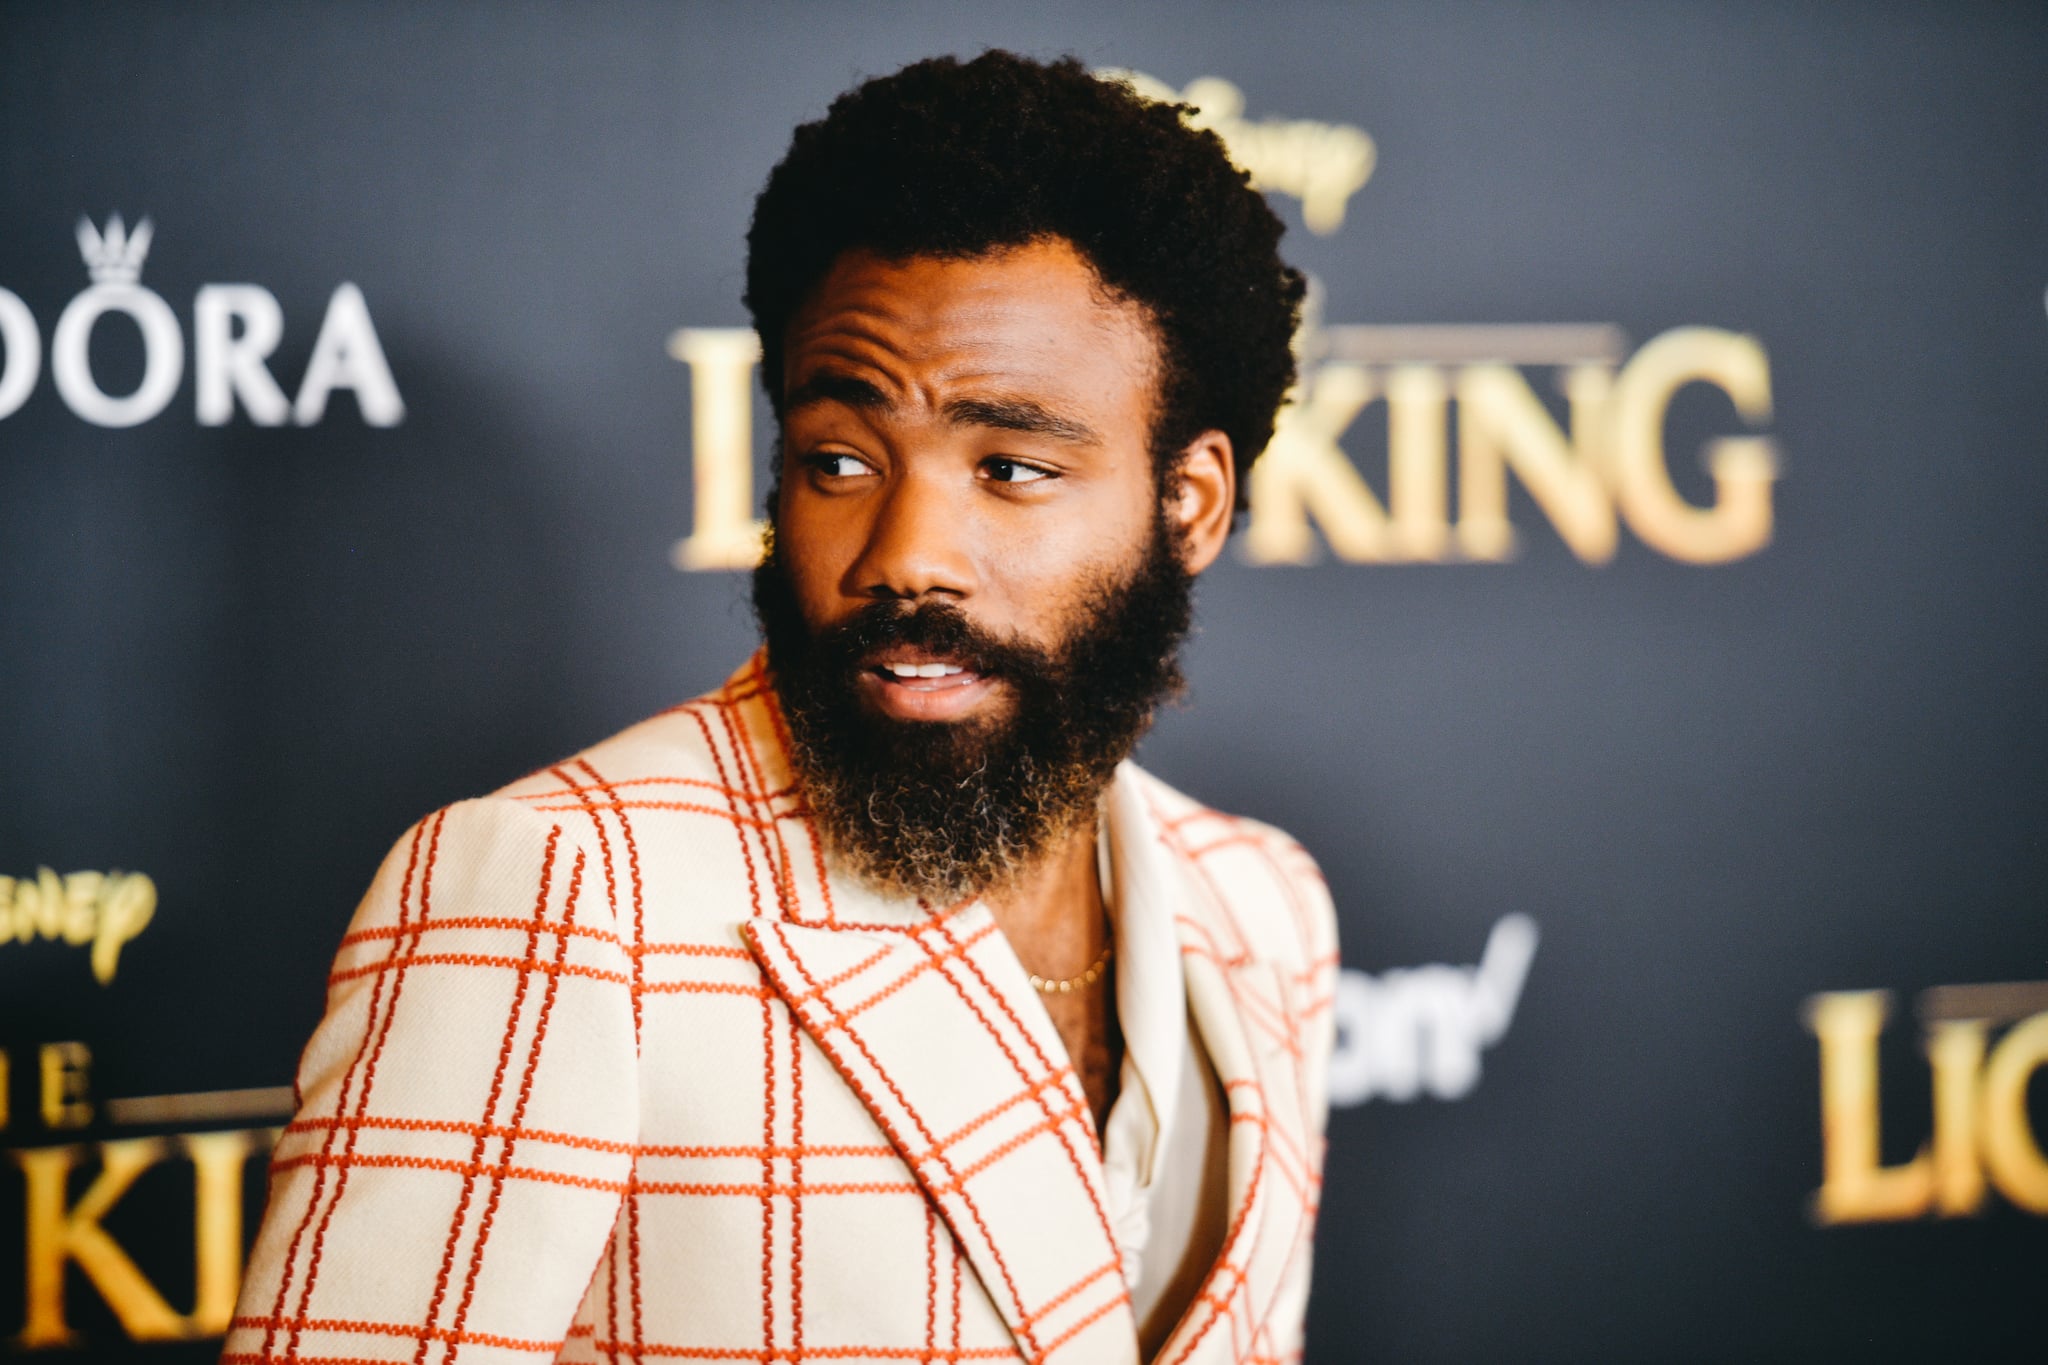 HOLLYWOOD, CALIFORNIA - JULY 09: (EDITORS NOTE: Image has been edited using digital filters) Donald Glover attends the premiere of Disney's 